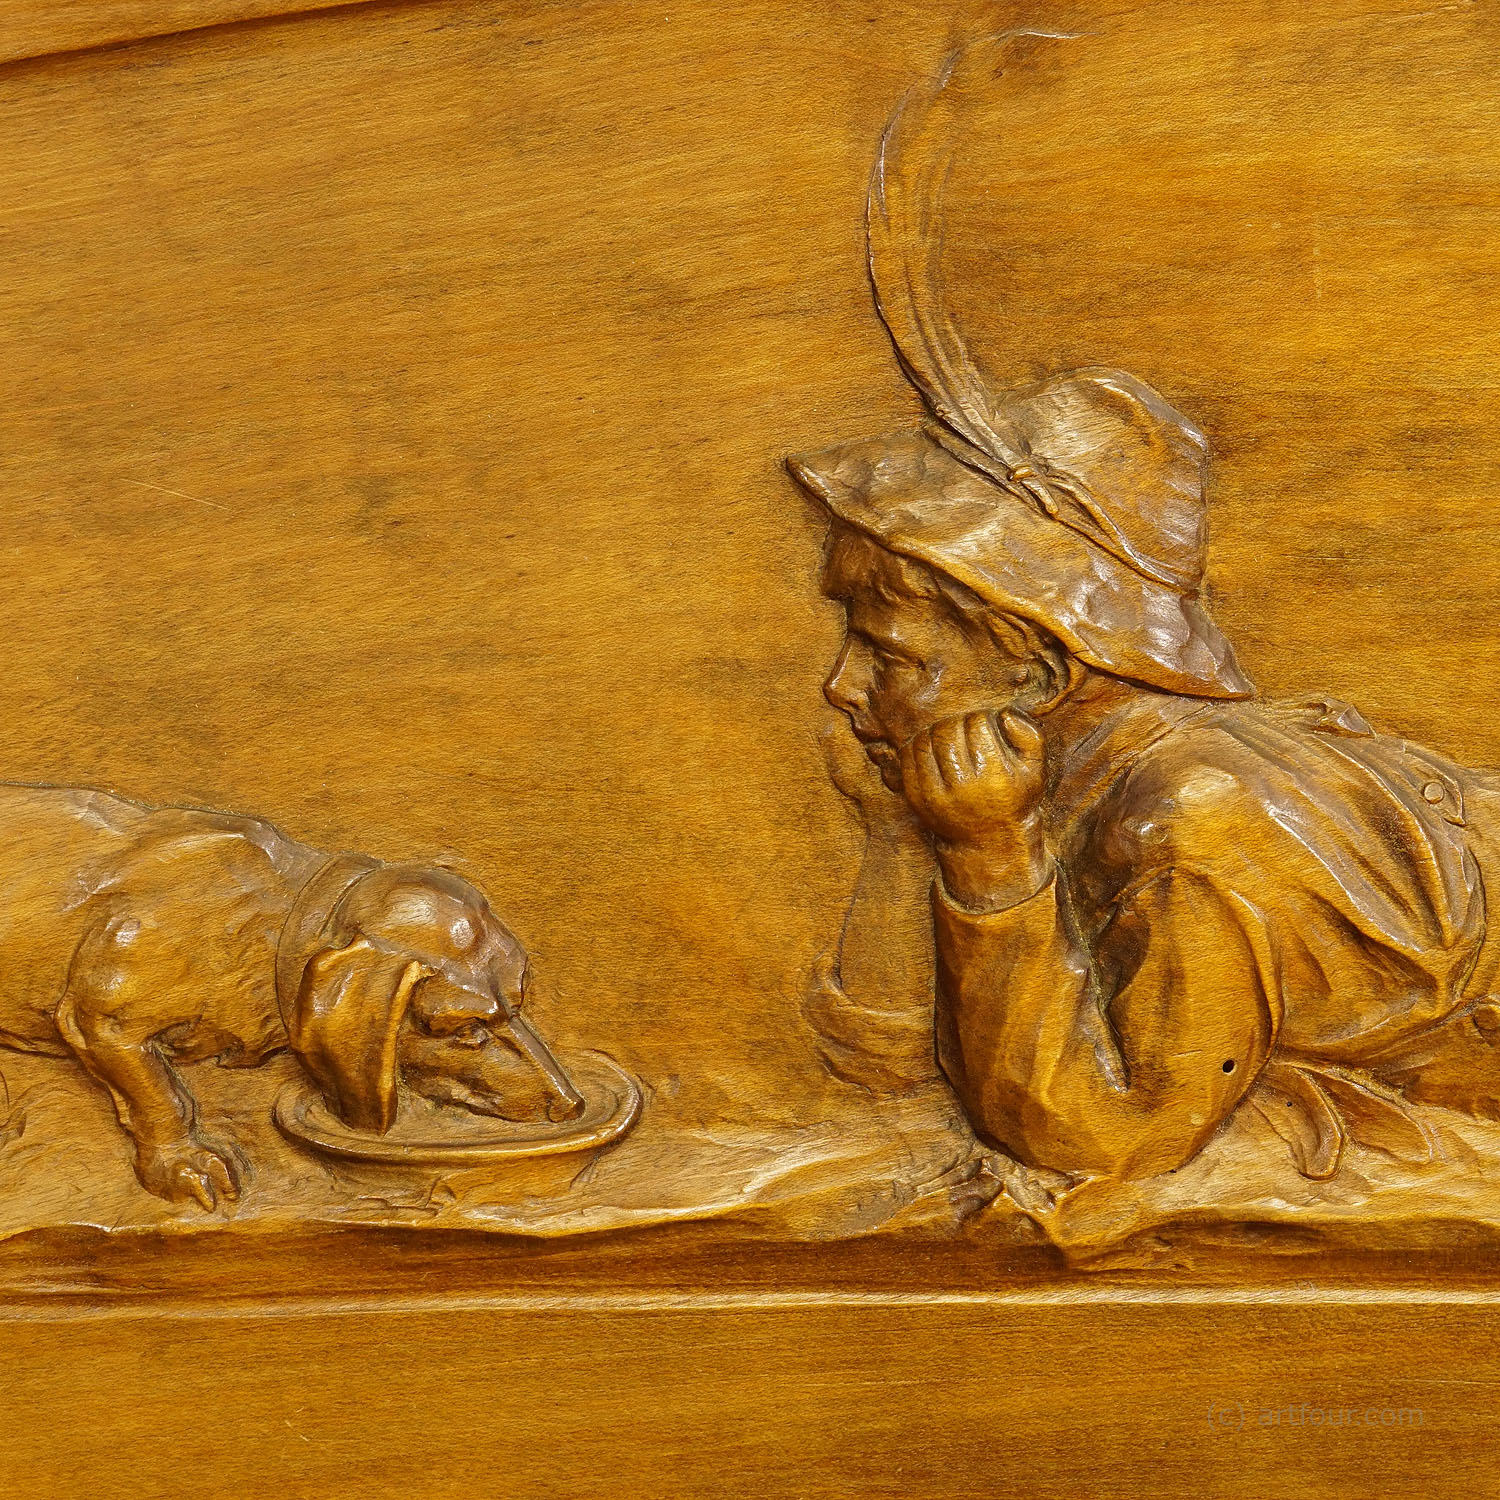 Wall Relief Wood Carving with Farmer Boy and Dachshund ca. 1900